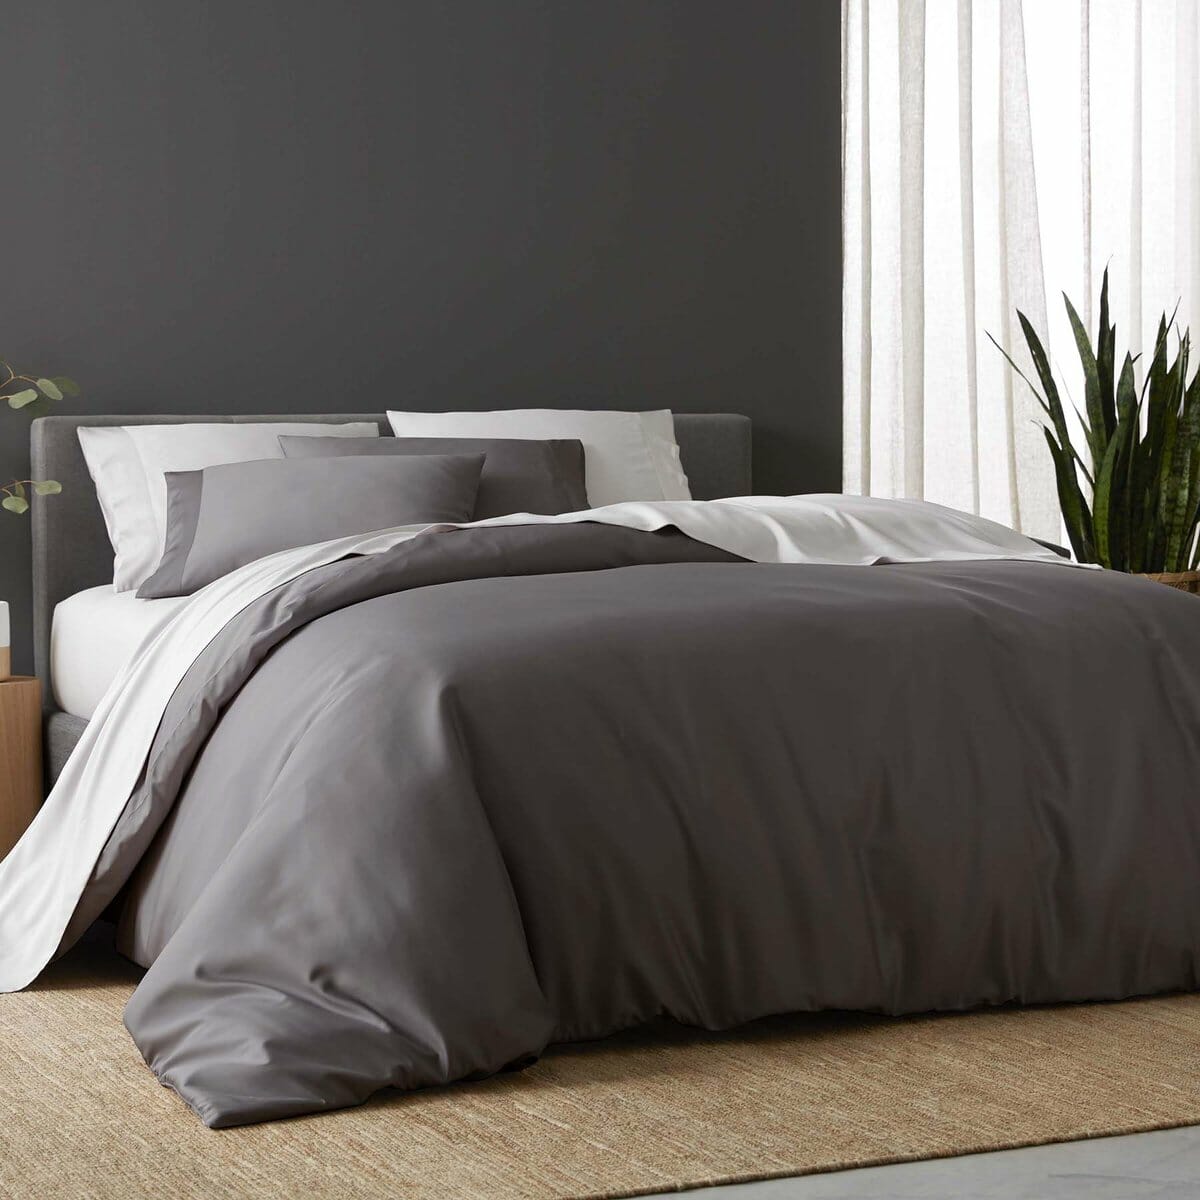 Featured image for “Sijo Sheets Review – The best sheet set we’ve ever tried?”